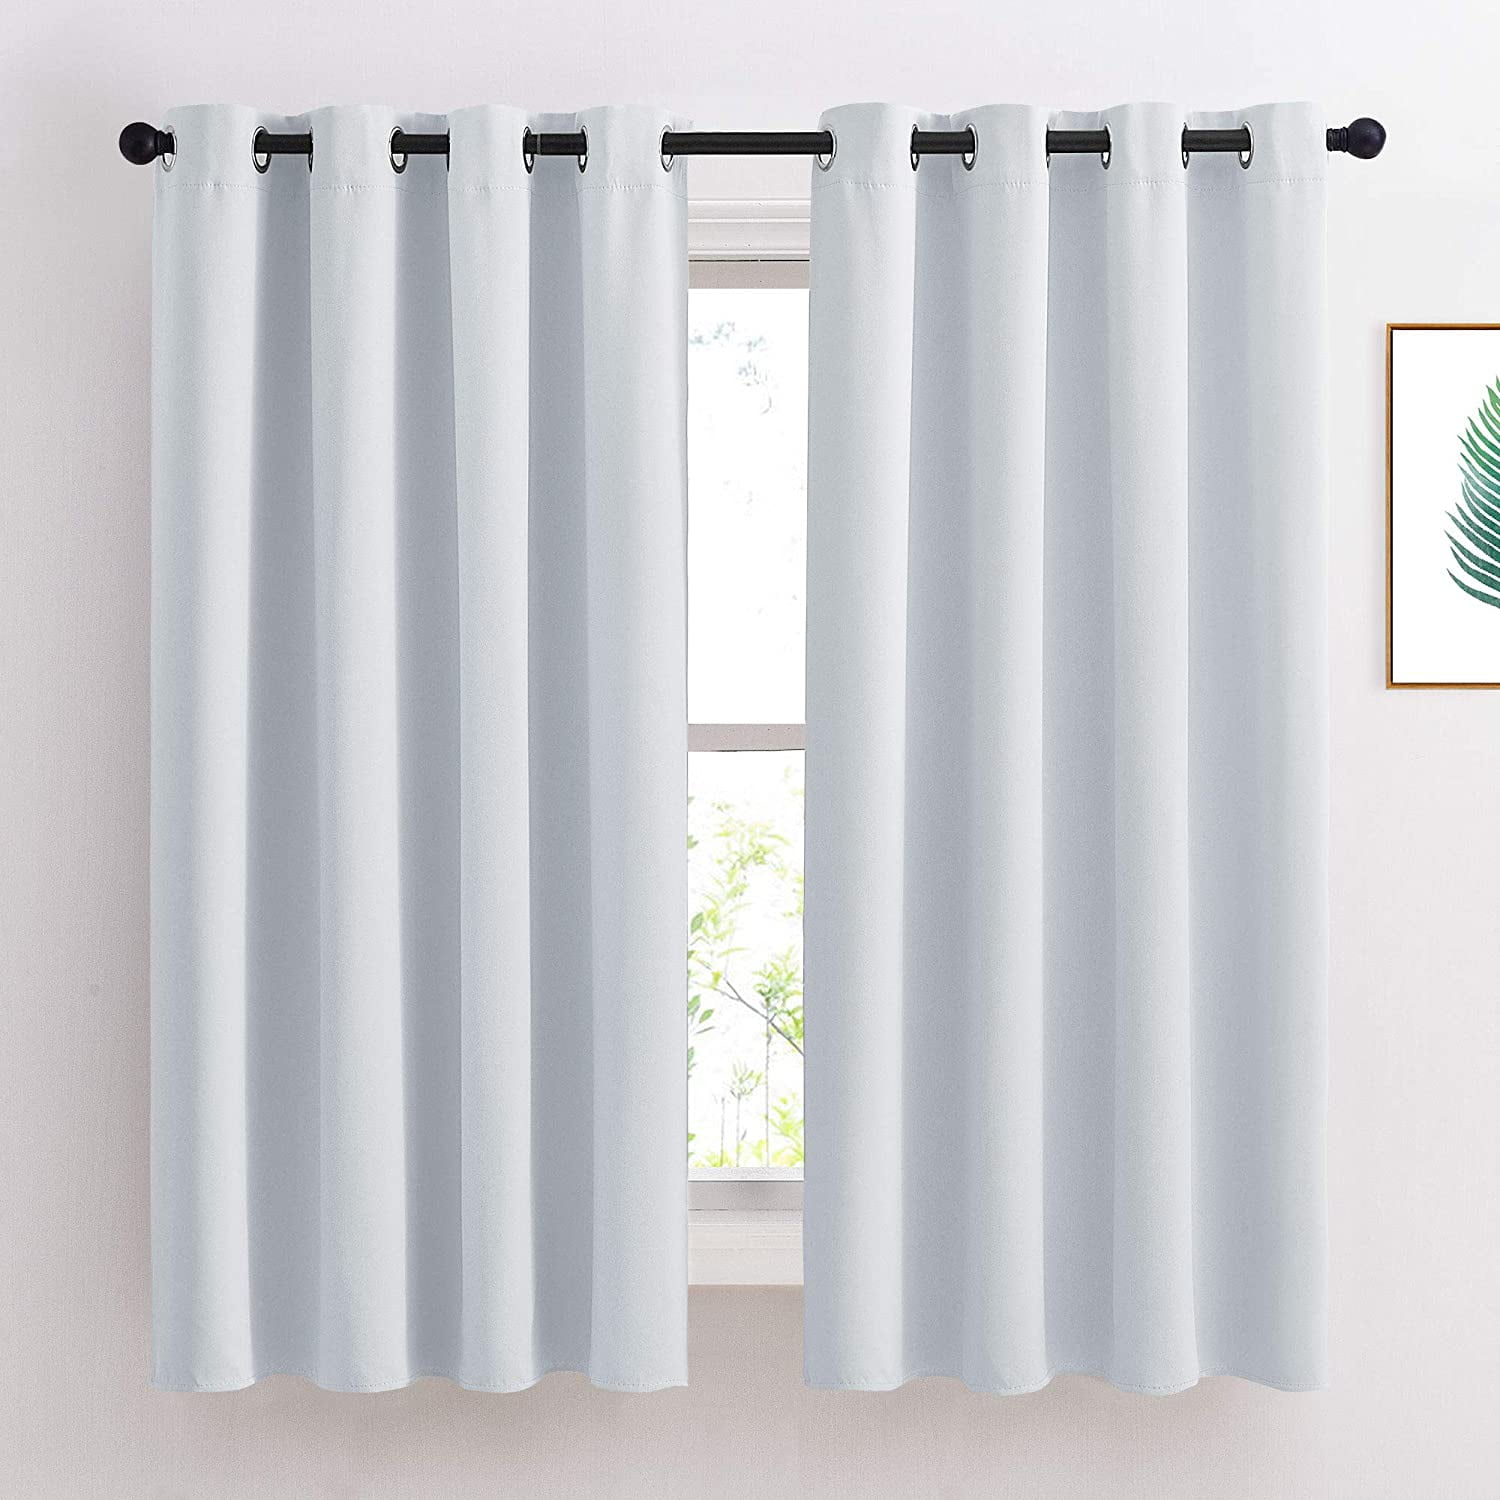 3 Pass Microfiber Noise Reducing NICETOWN Blackout Curtains Panels for Bedroom 